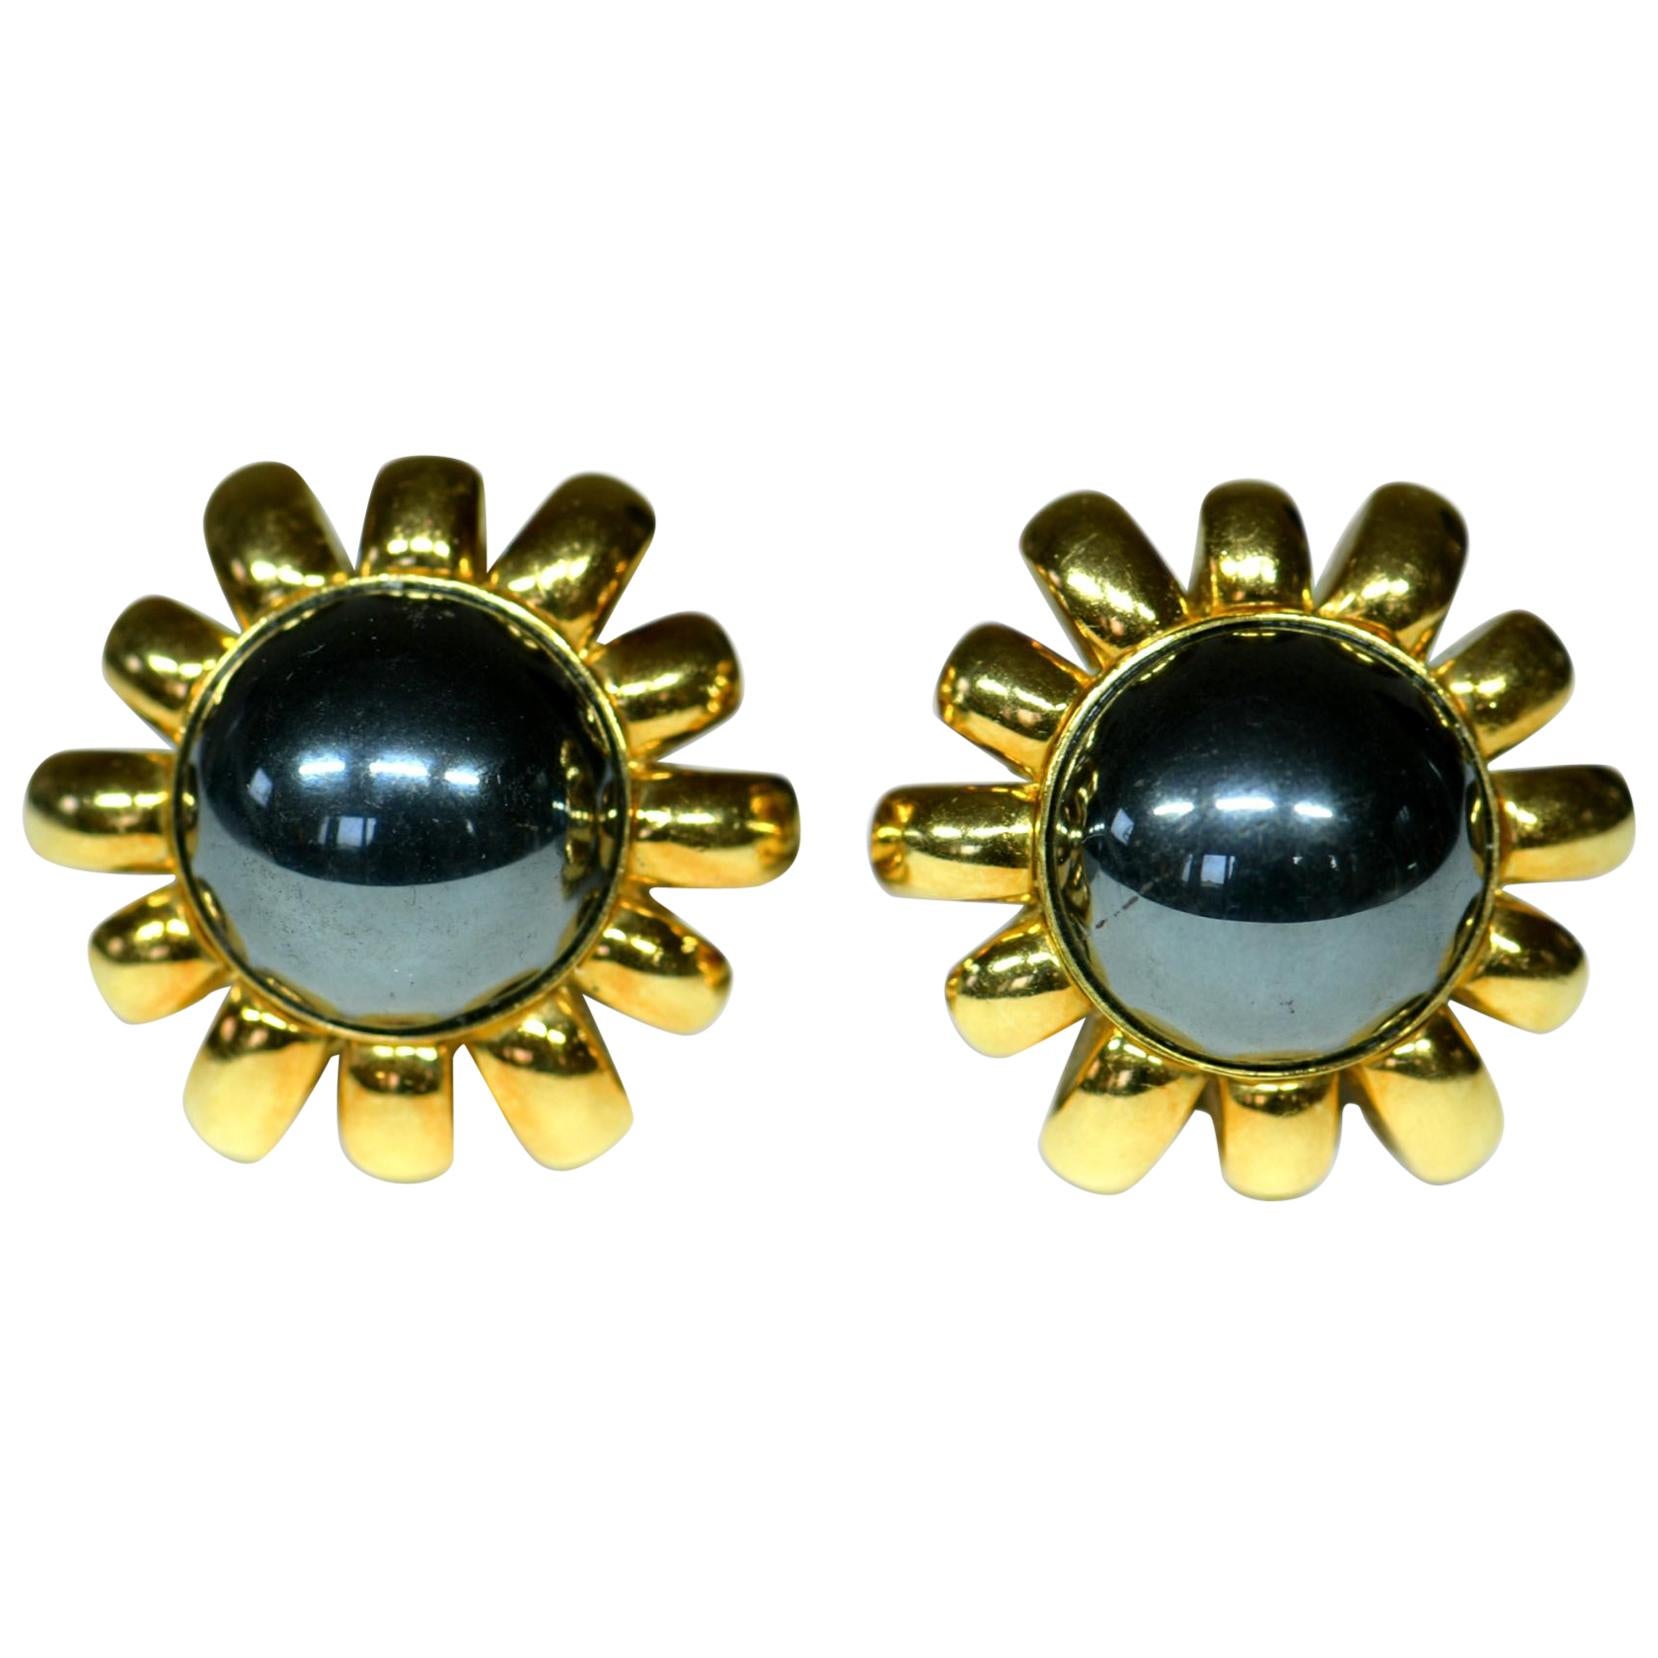 Hematite and Gold Earrings by Harry Winston